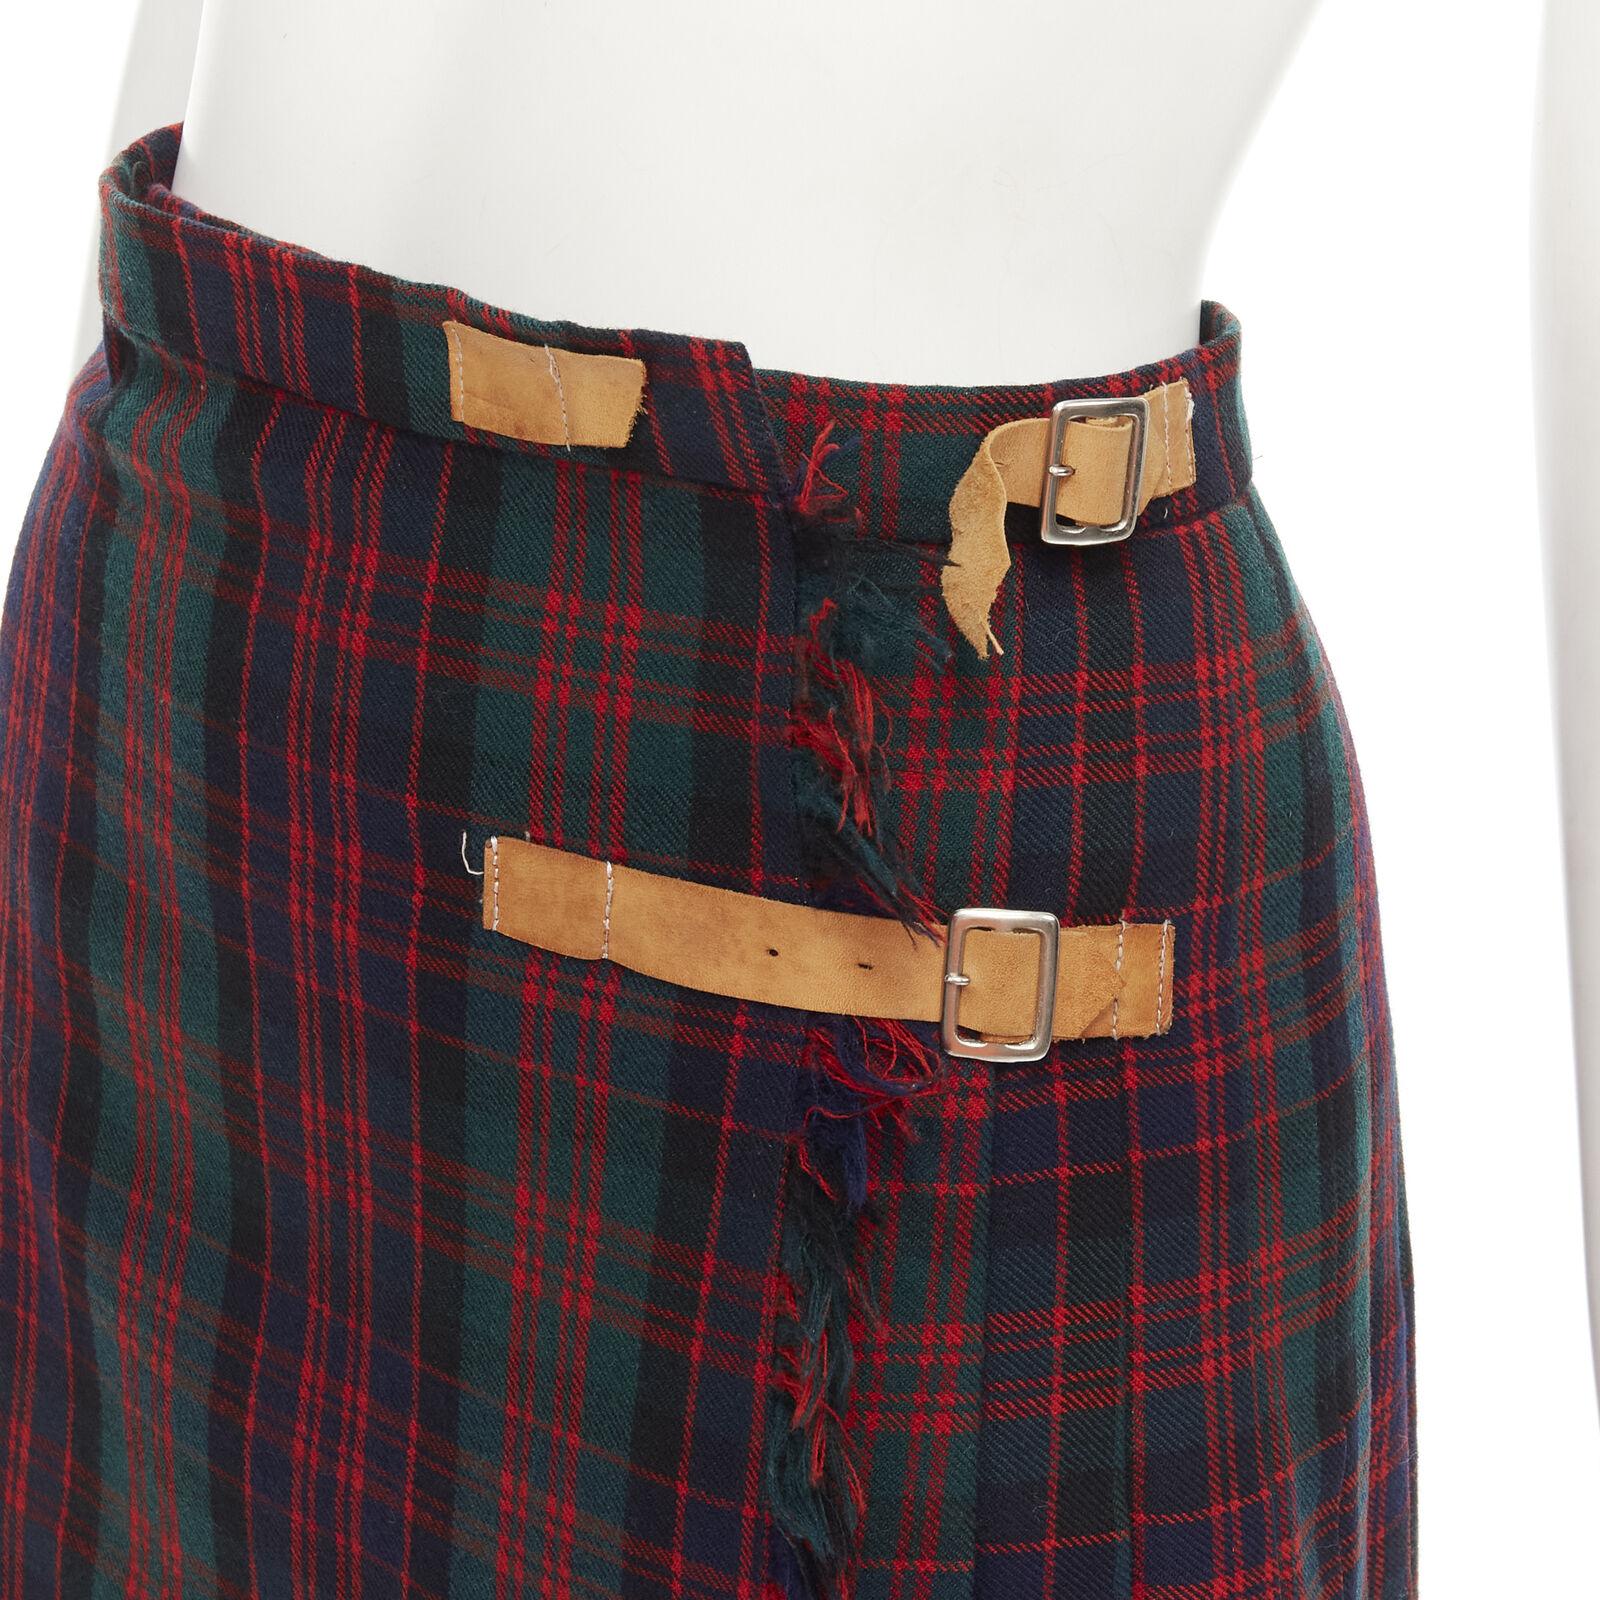 COMME DES GARCONS Vintage 1970's Punk red plaid leather buckles punk kilt skirt
Reference: CRTI/A00637
Brand: Comme Des Garcons
Designer: Rei Kawakubo
Collection: 1970s
Material: Feels like wool
Color: Red, Green
Pattern: Checkered
Closure: Snap